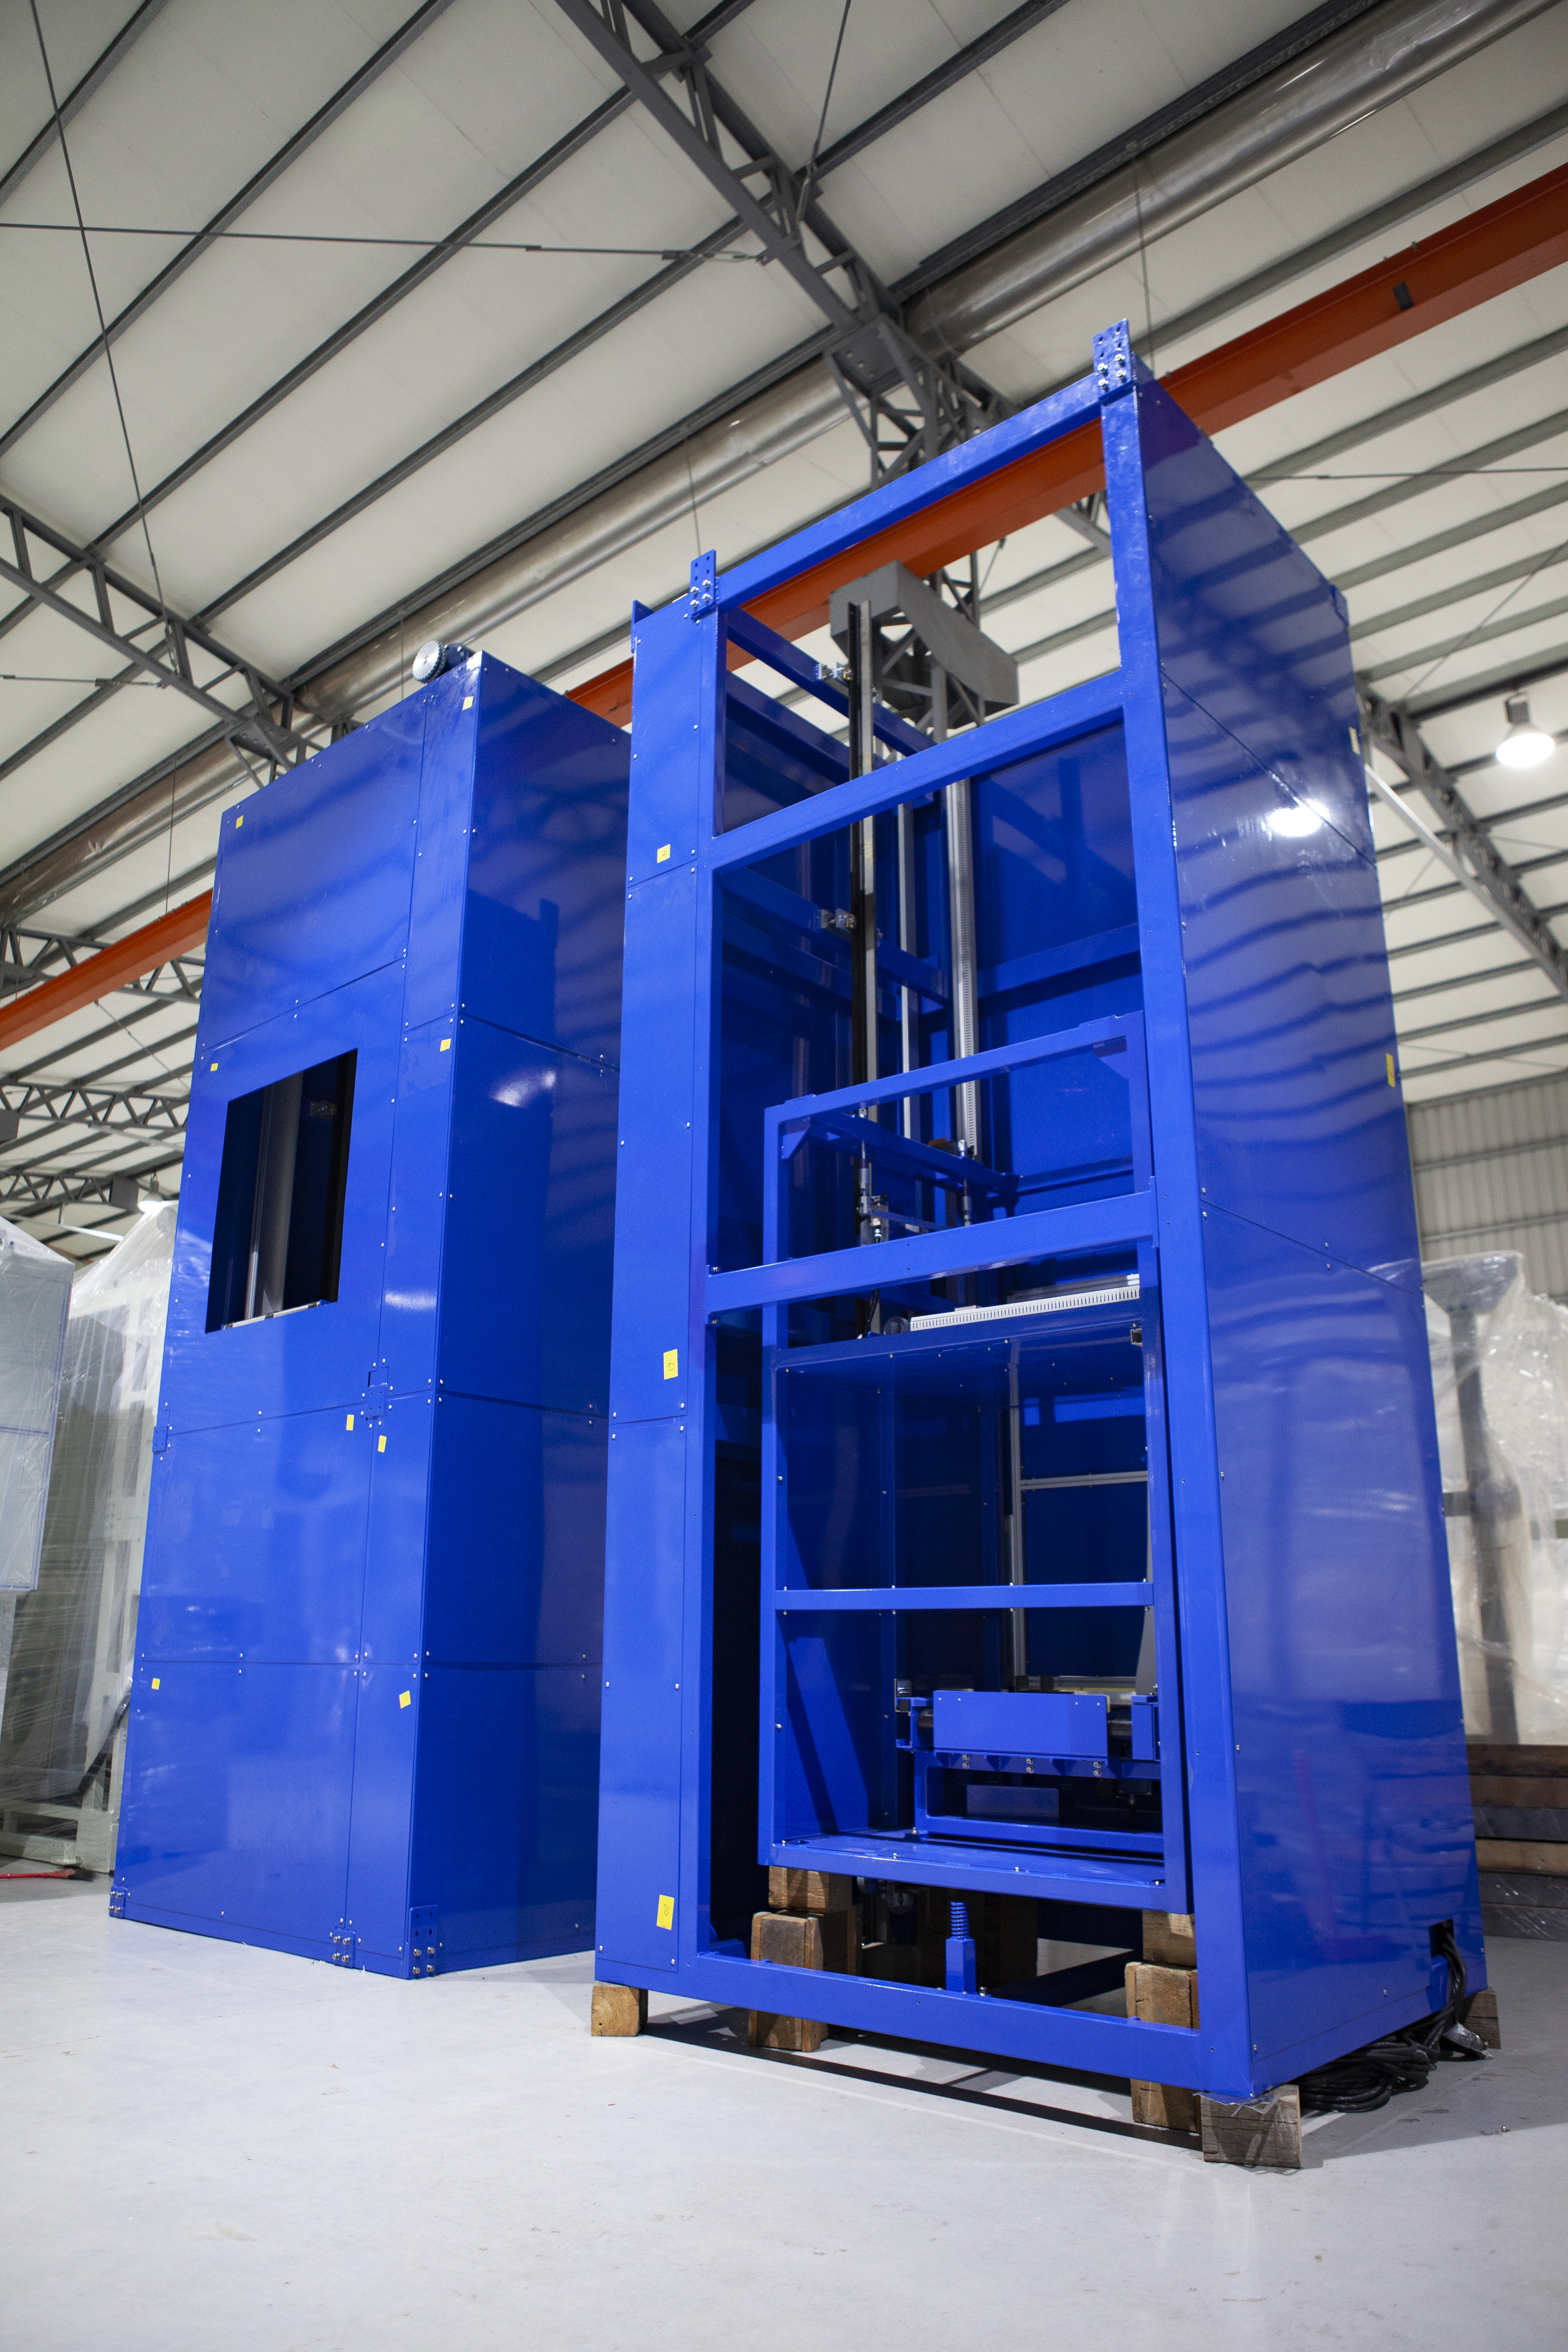 A Vertical Reciprocating Elevator (VRC) come with various safety features, such as interlocks and emergency stop buttons, to ensure the safety of the operators and the materials being transported. With their ability to transport materials between different levels with ease and efficiency, the Vertical Reciprocating Elevator is the perfect choice for your clean room needs.